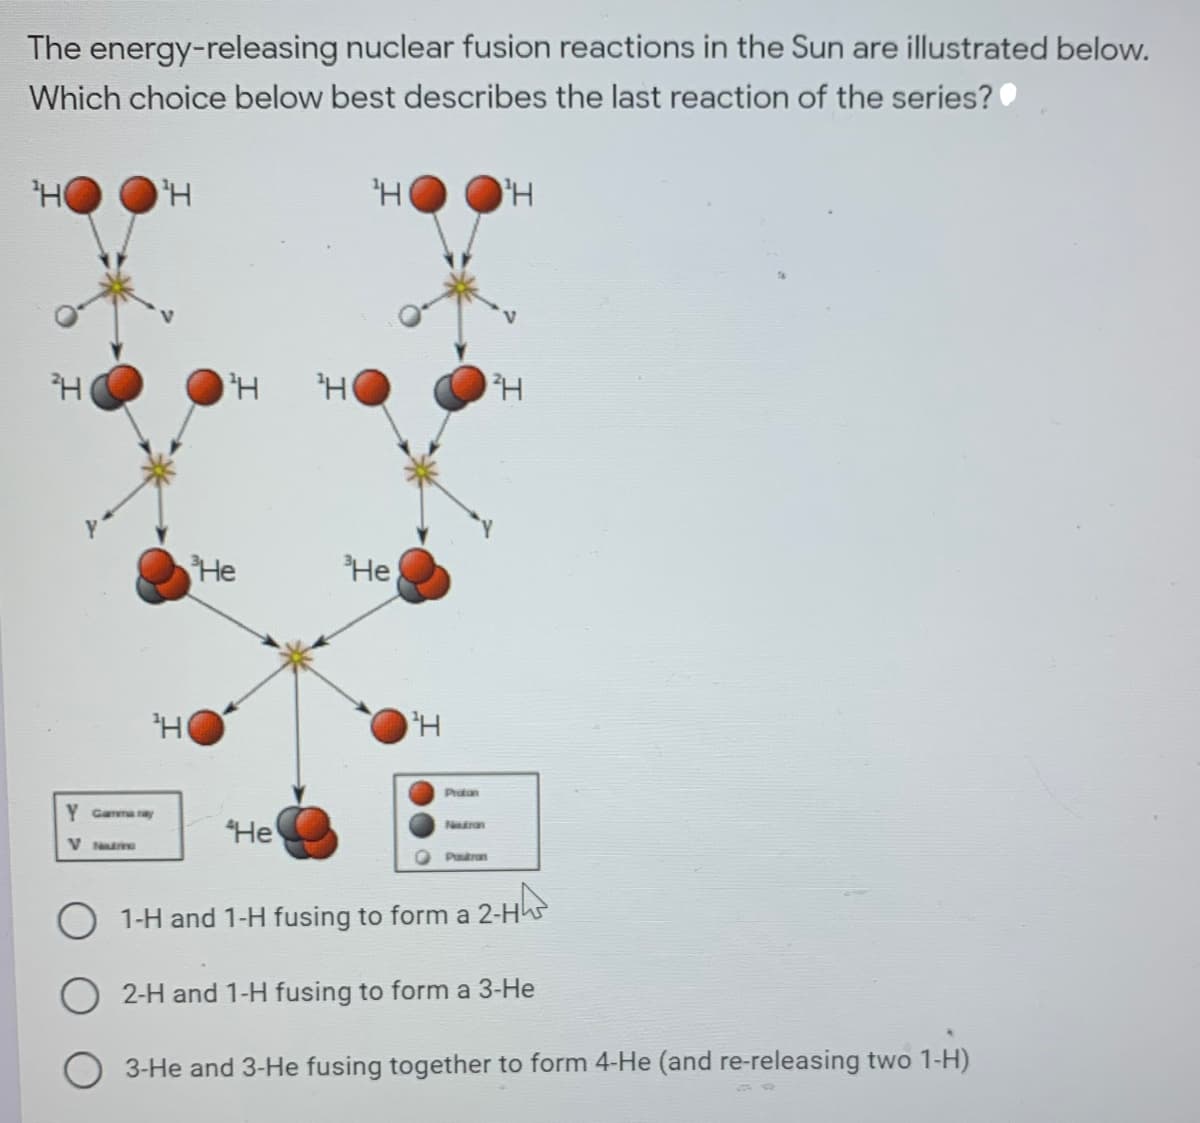 The energy-releasing nuclear fusion reactions in the Sun are illustrated below.
Which choice below best describes the last reaction of the series?
He
He
Pratan
Y Ganmaay
Не
Nan
V
Ptran
1-H and 1-H fusing to form a 2-Hh
O 2-H and 1-H fusing to form a 3-He
3-He and 3-He fusing together to form 4-He (and re-releasing two 1-H)
